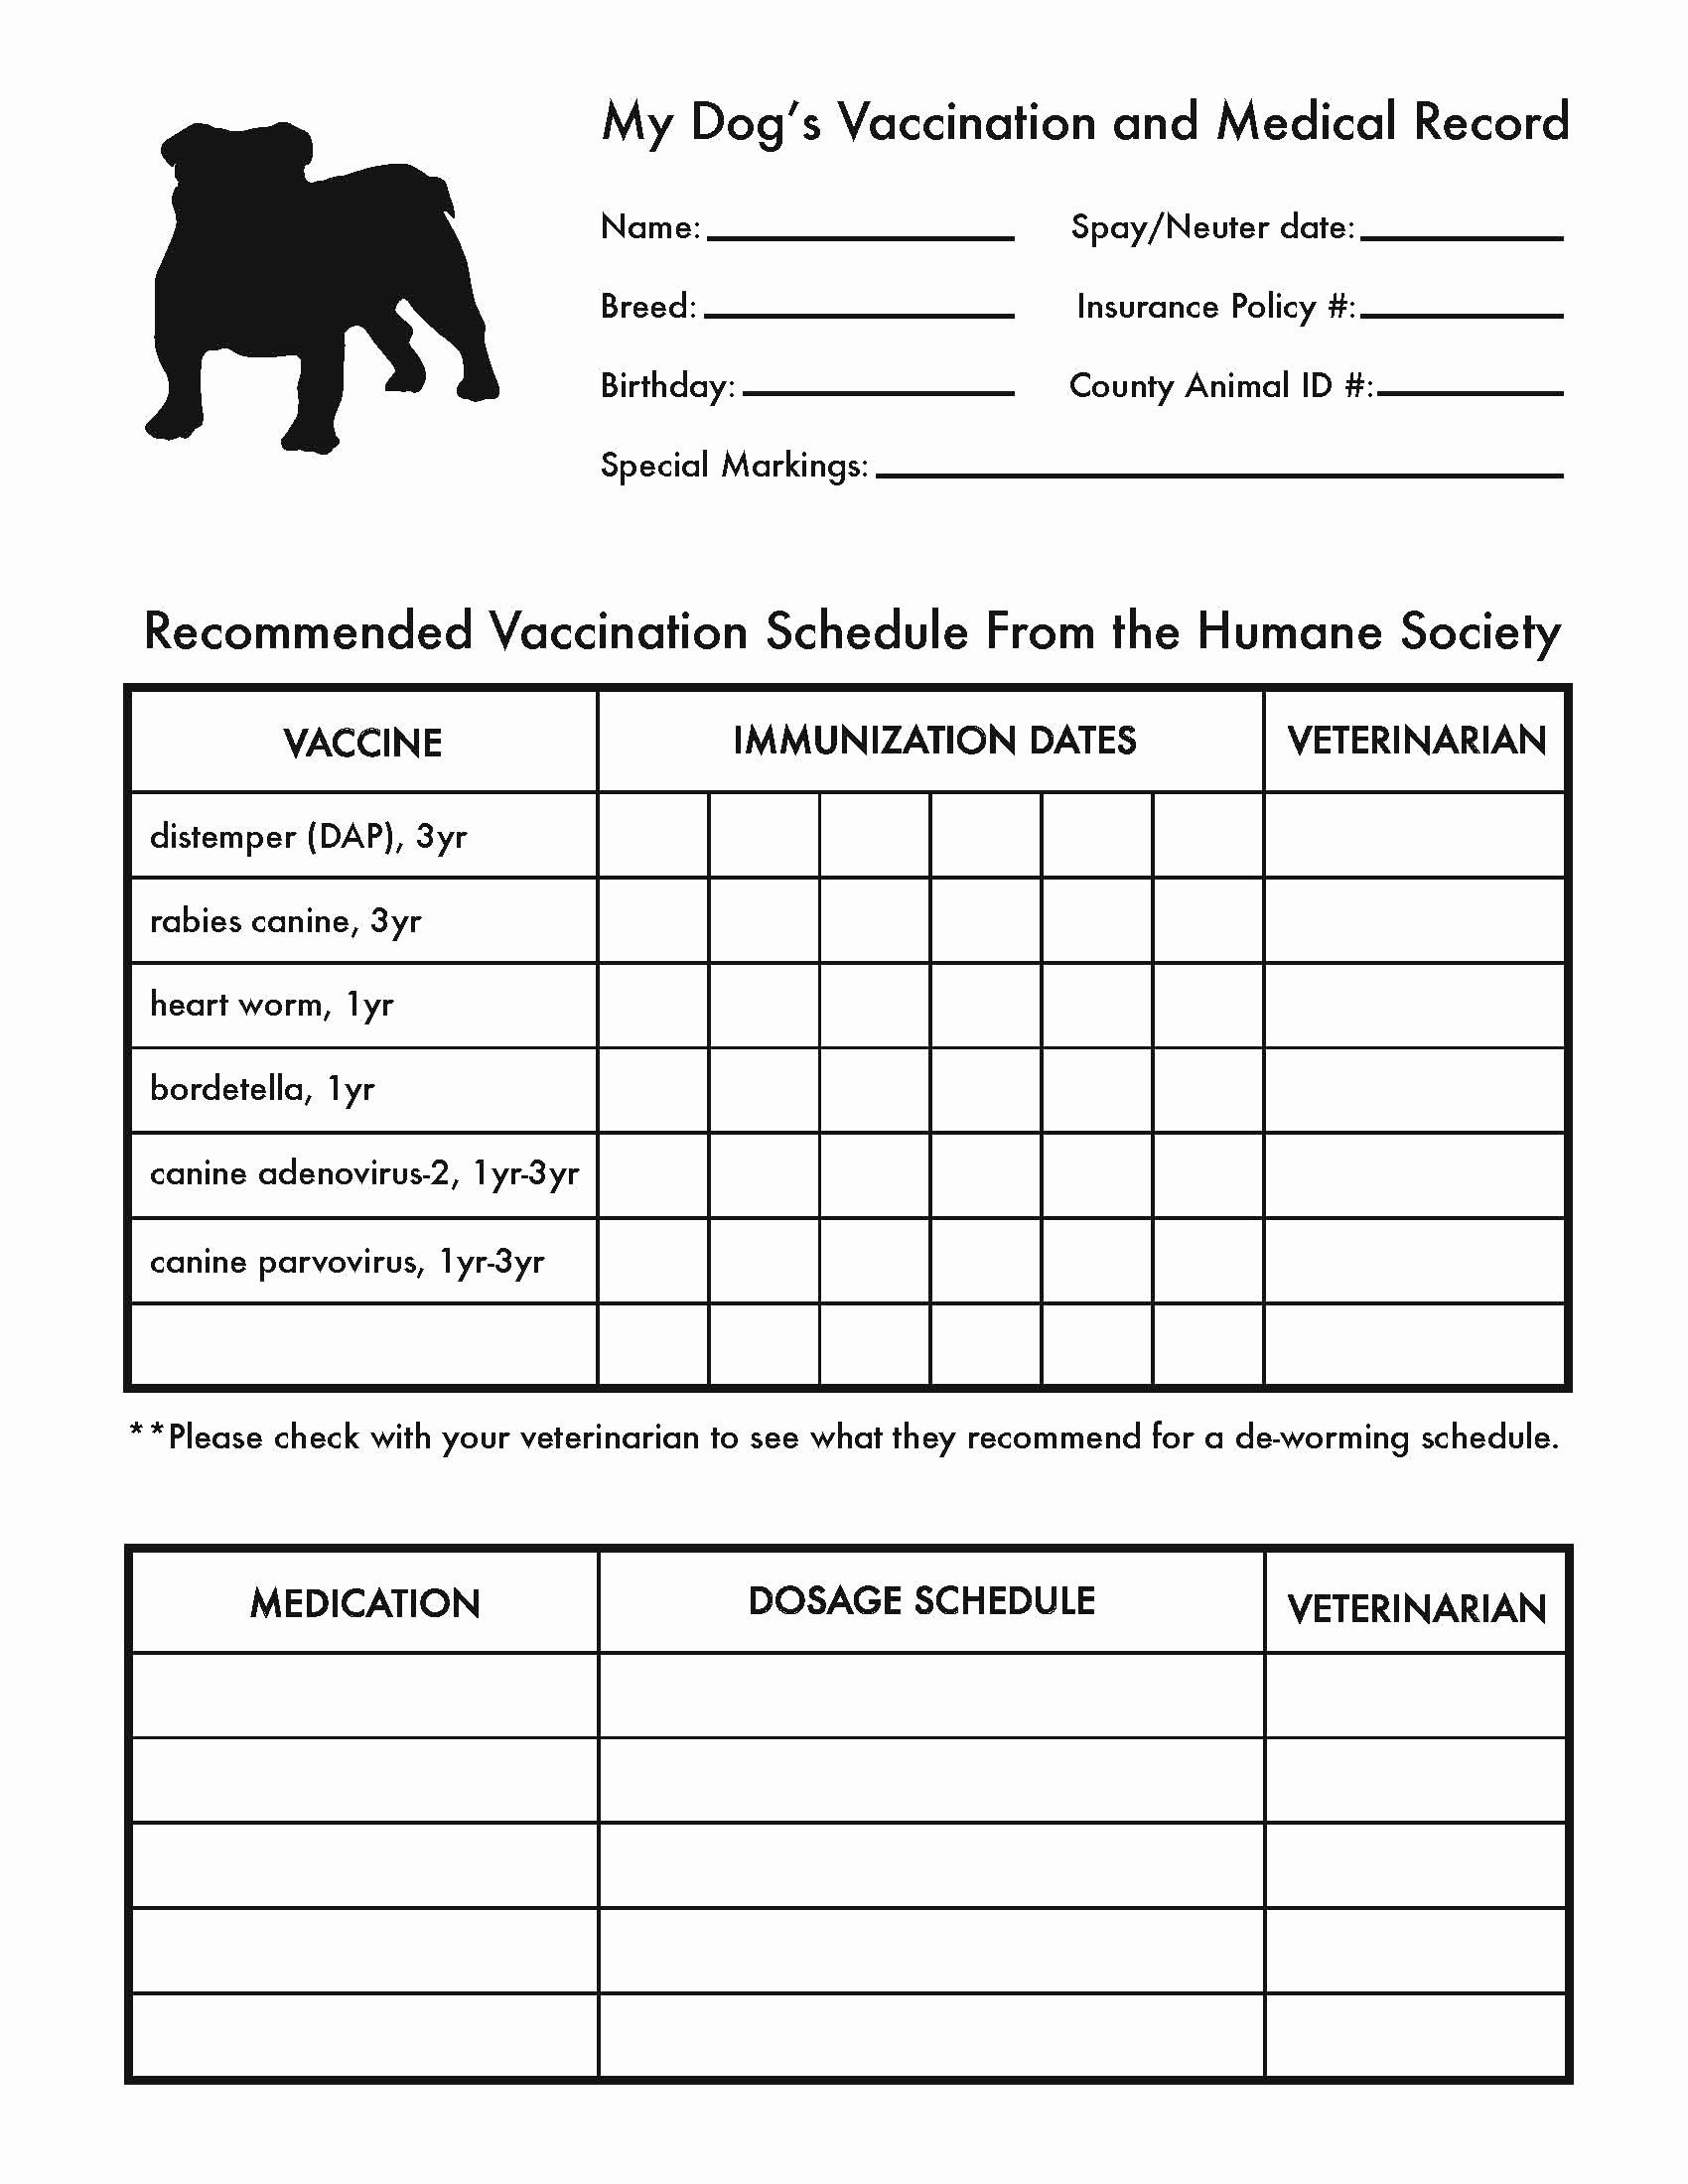 Pet Vaccination Record Template Lovely are Your Pet’s Medical Records organized